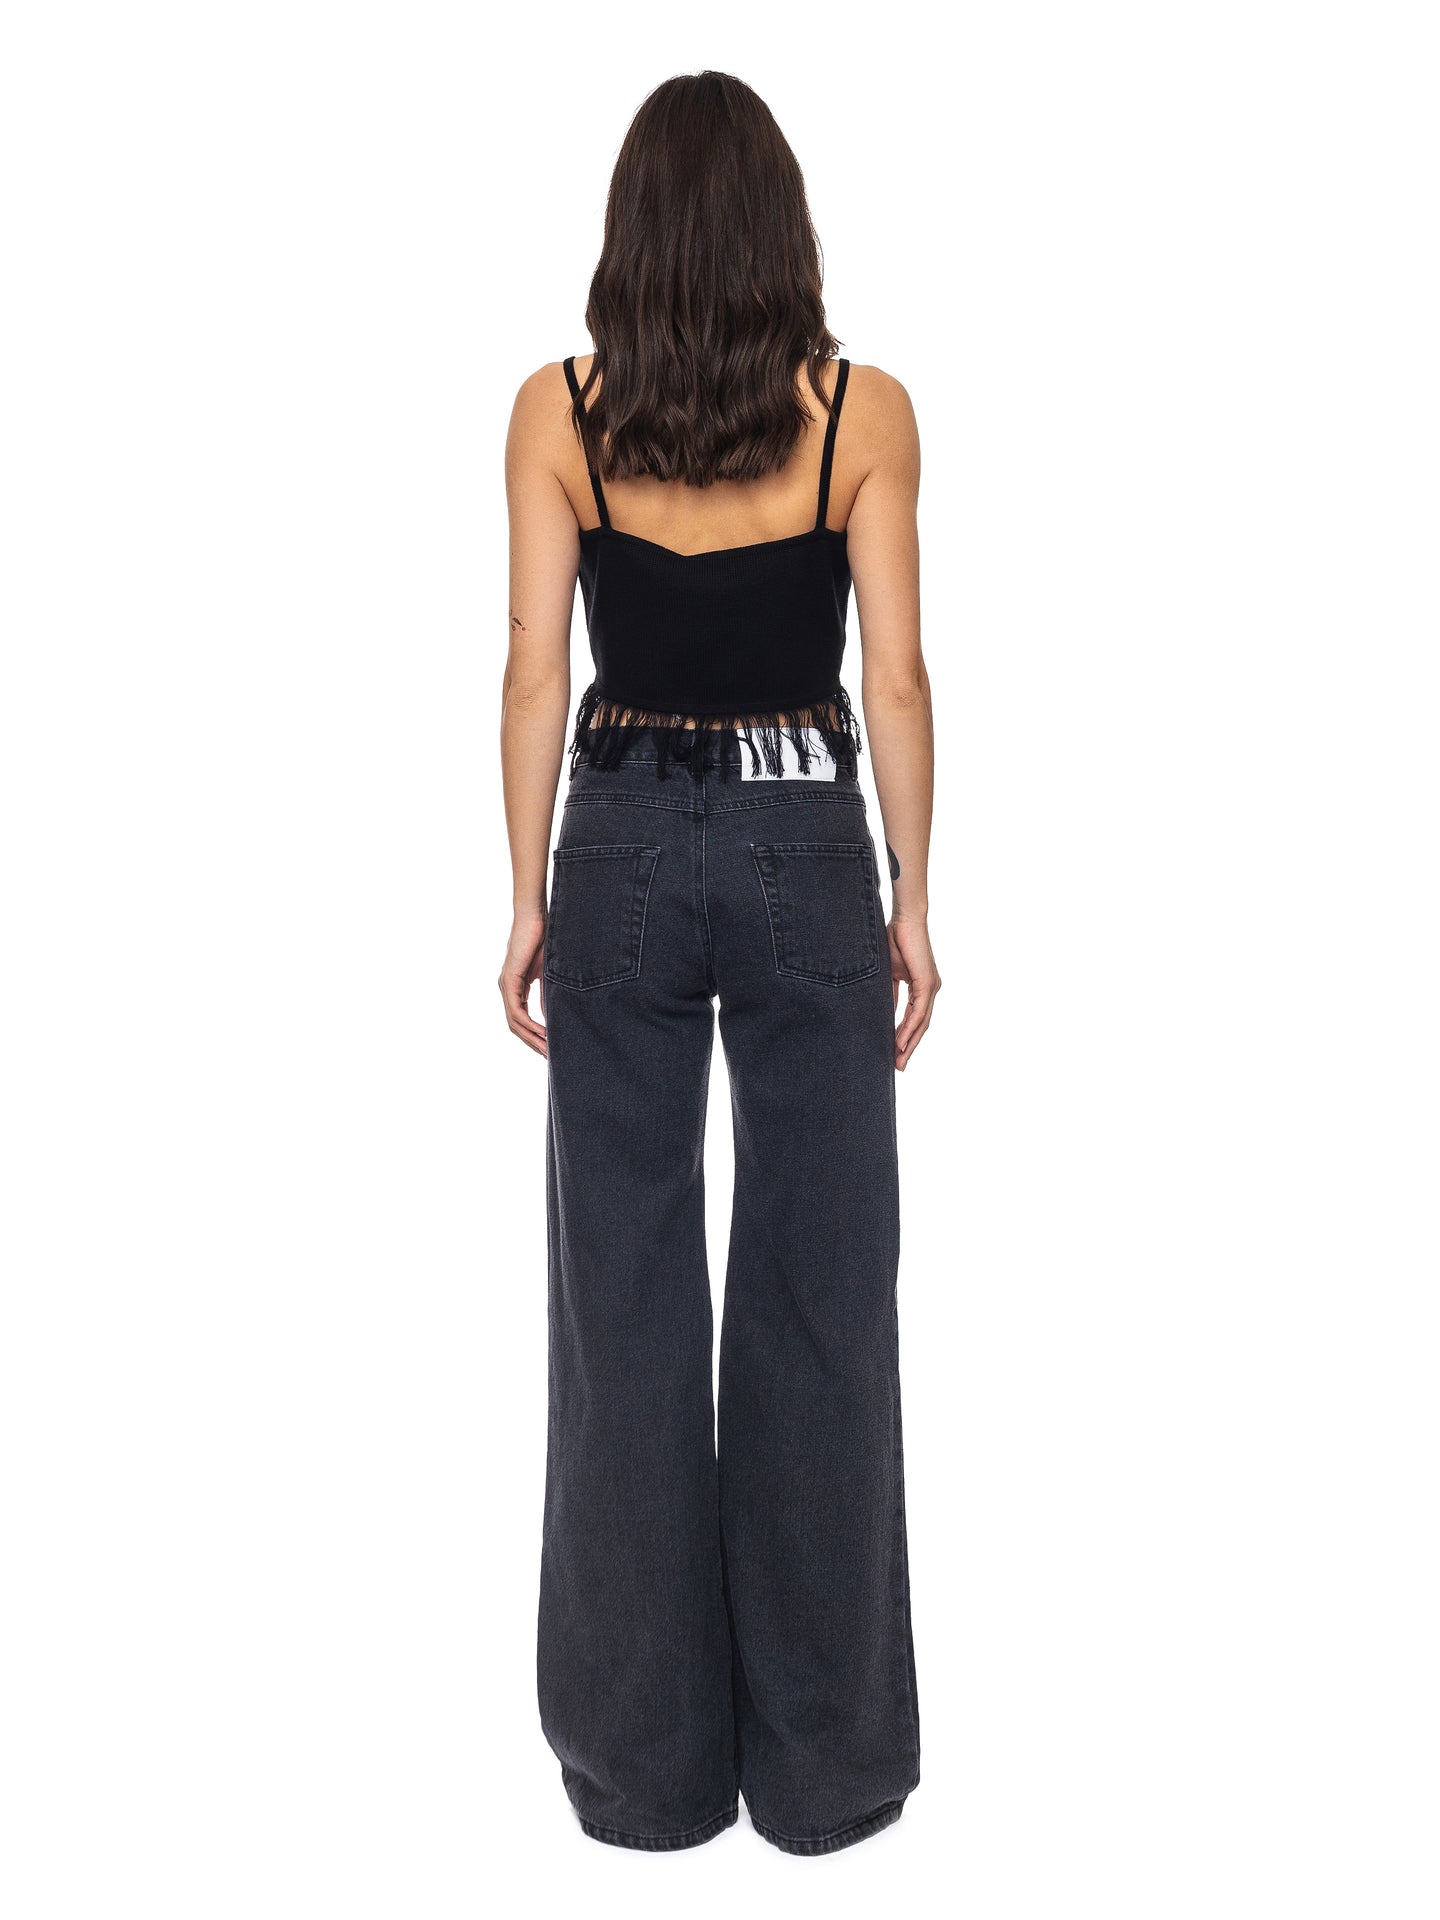 Flare Jeans image